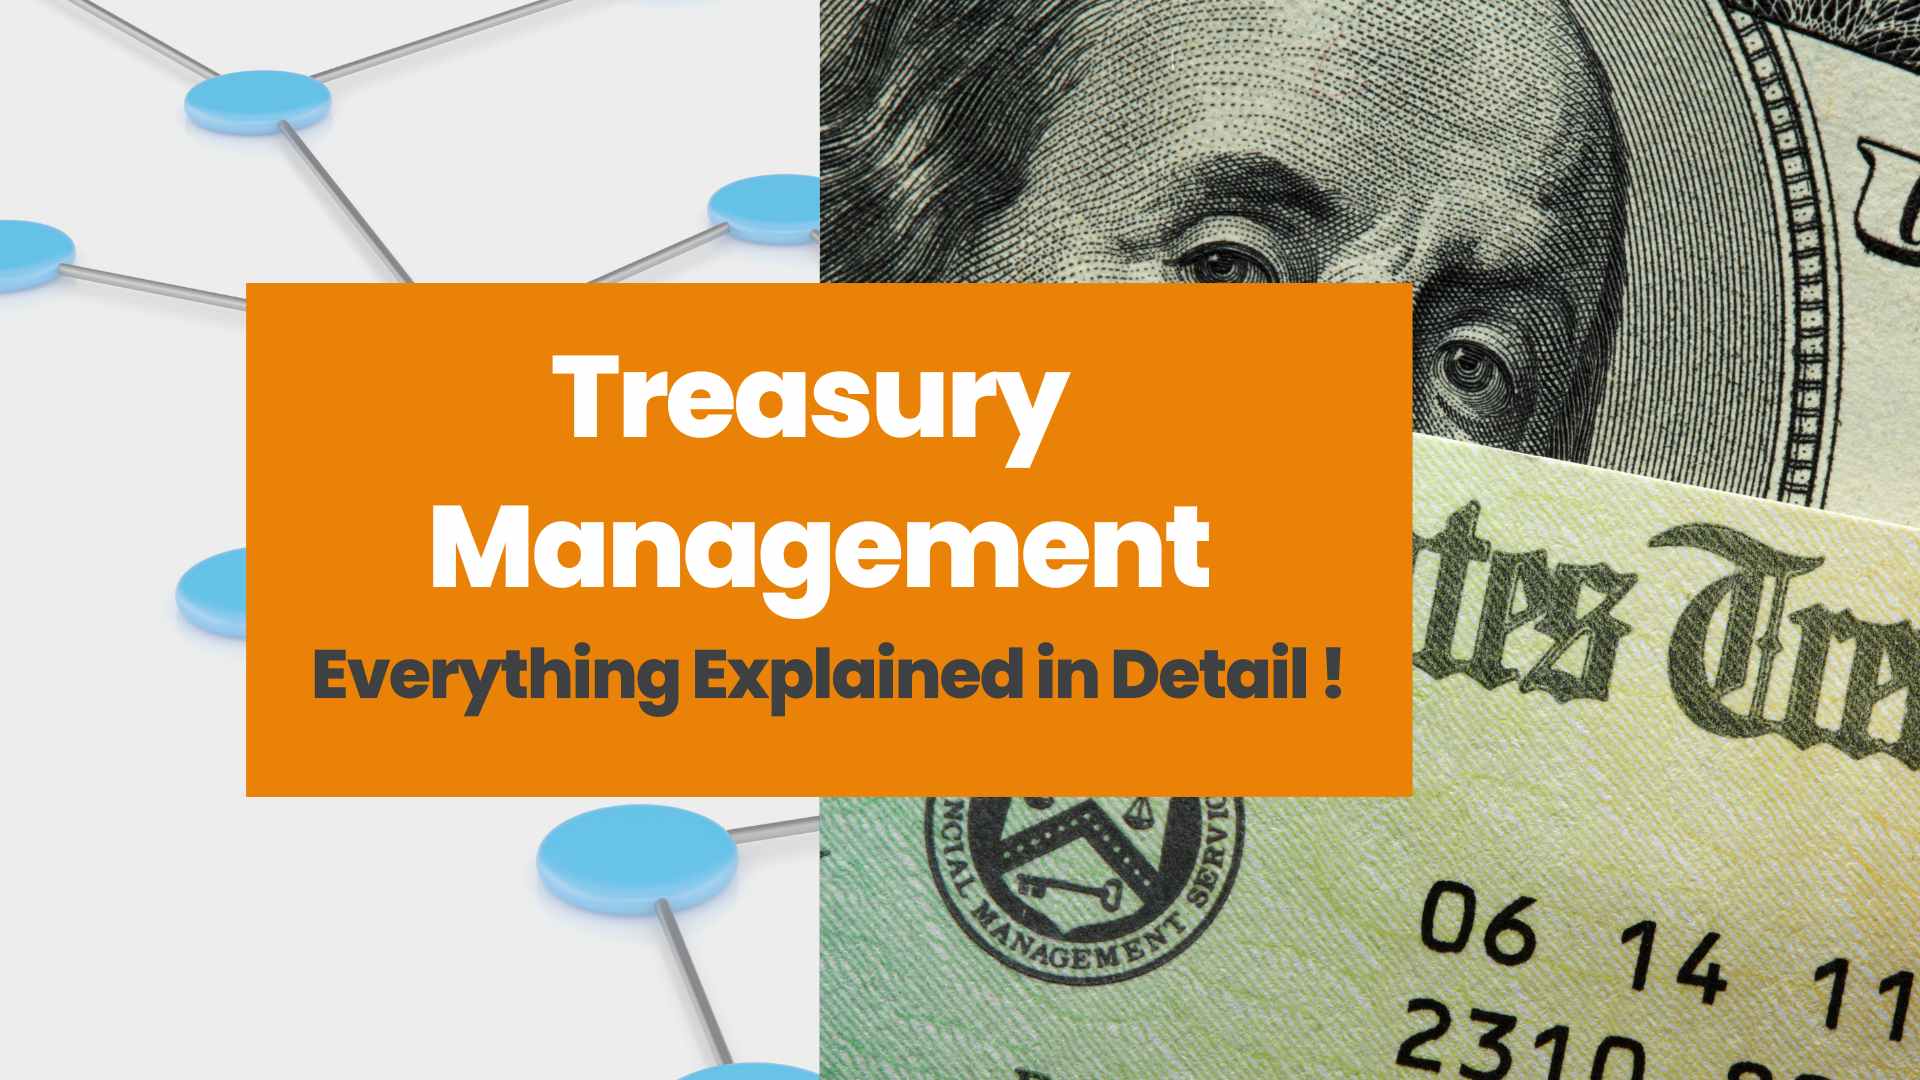 research paper on treasury management